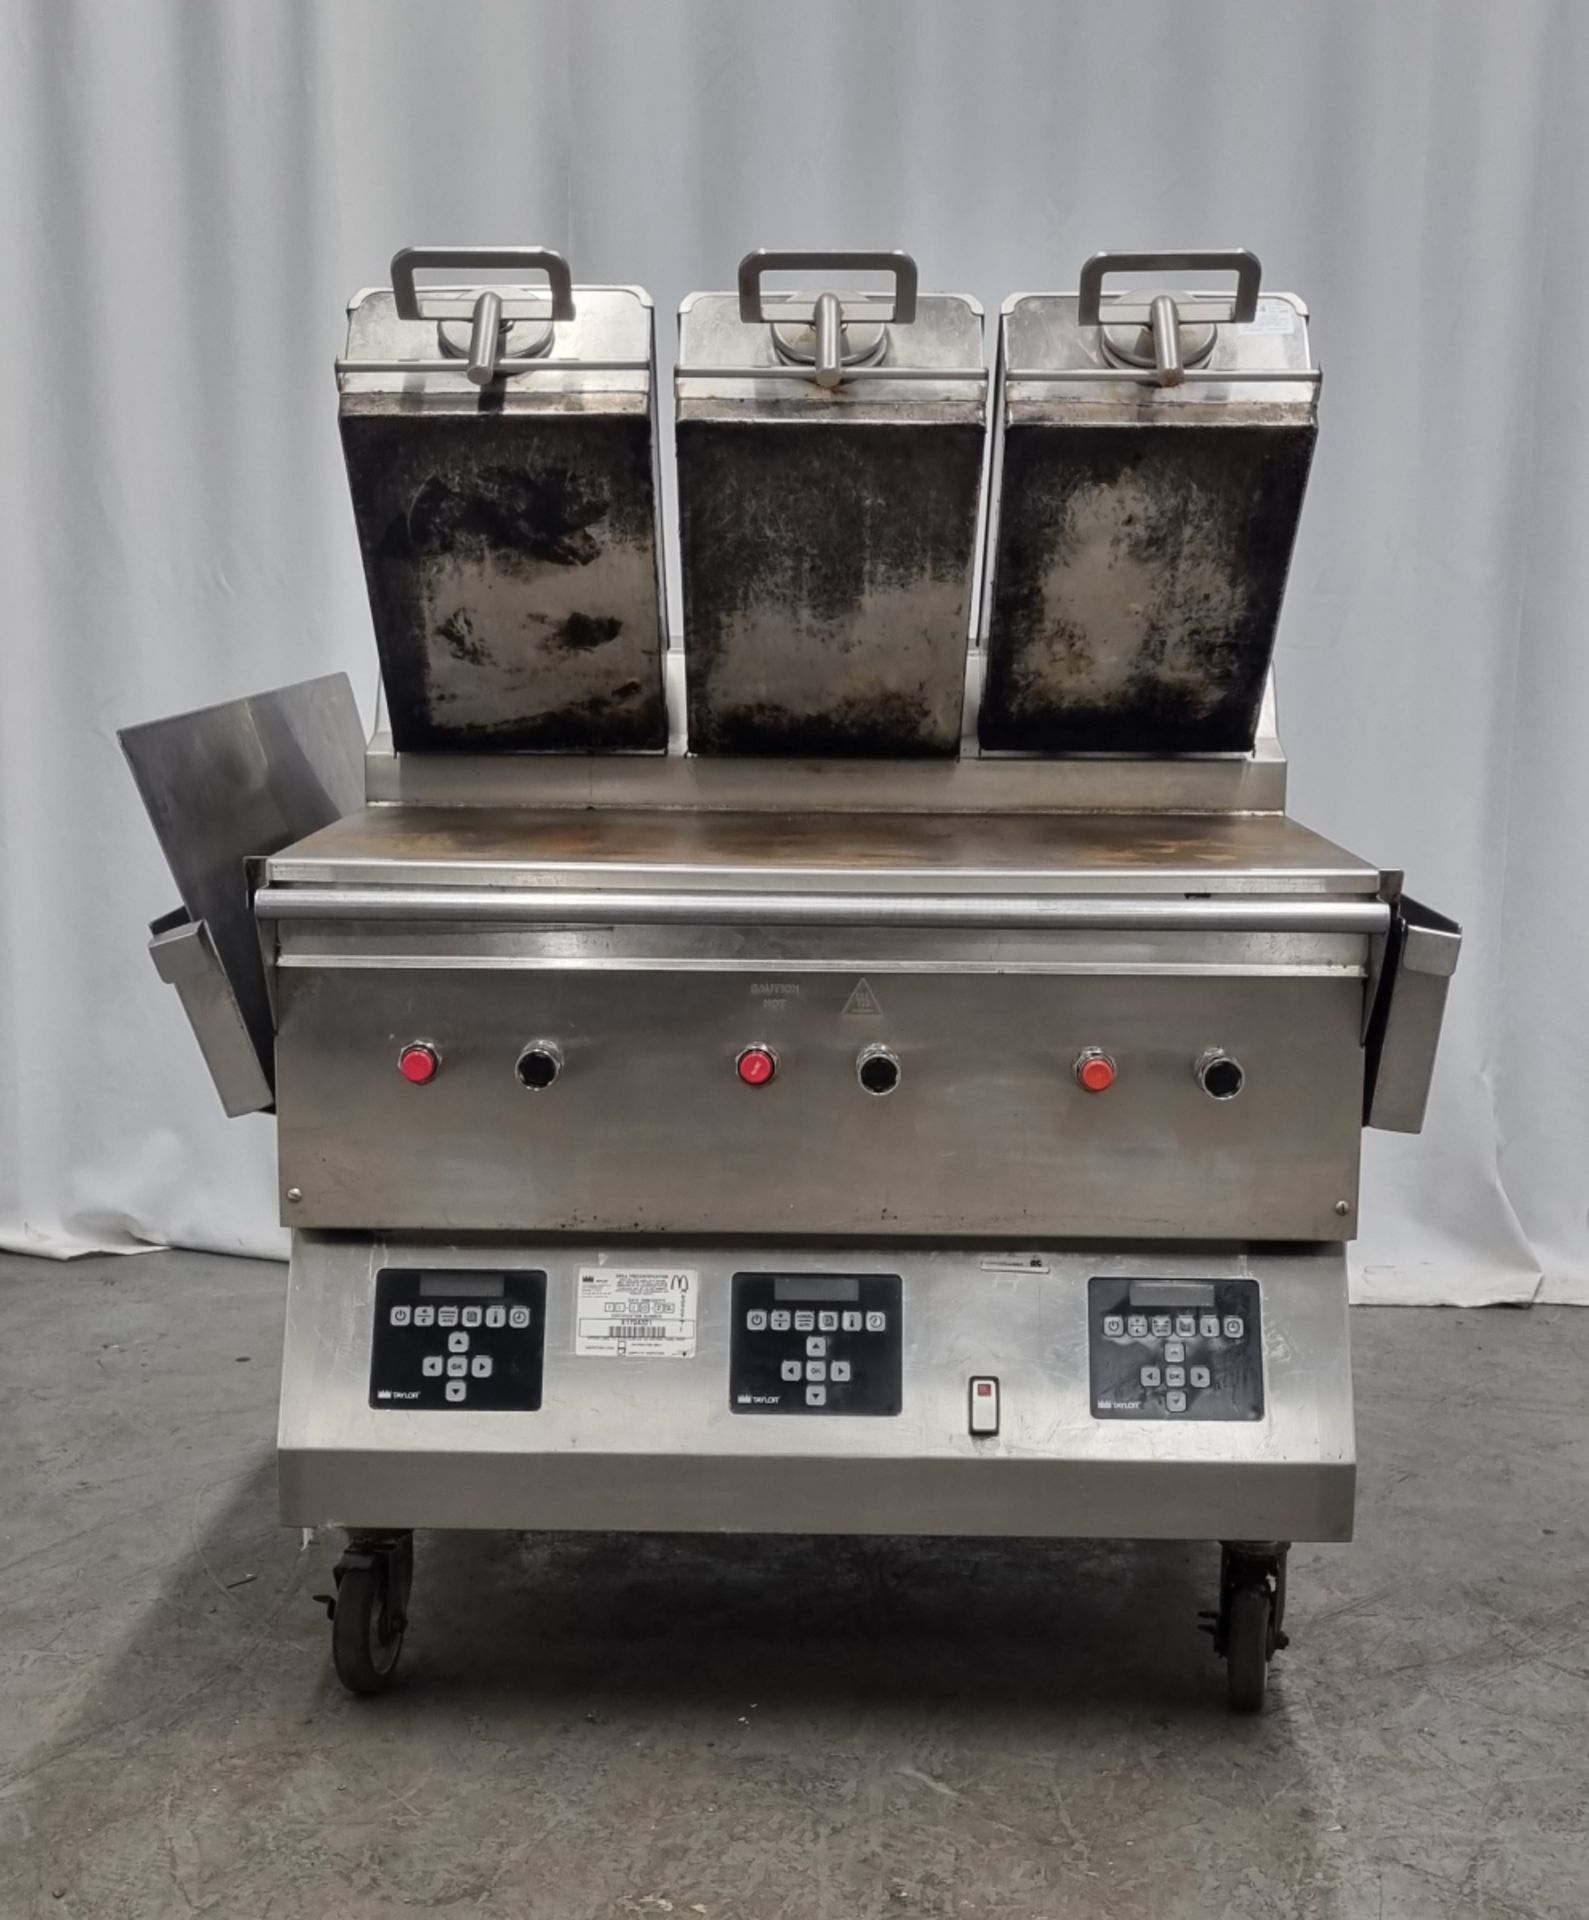 Taylor Commercial Foodservice stainless steel three zone clamshell grill - Image 2 of 11